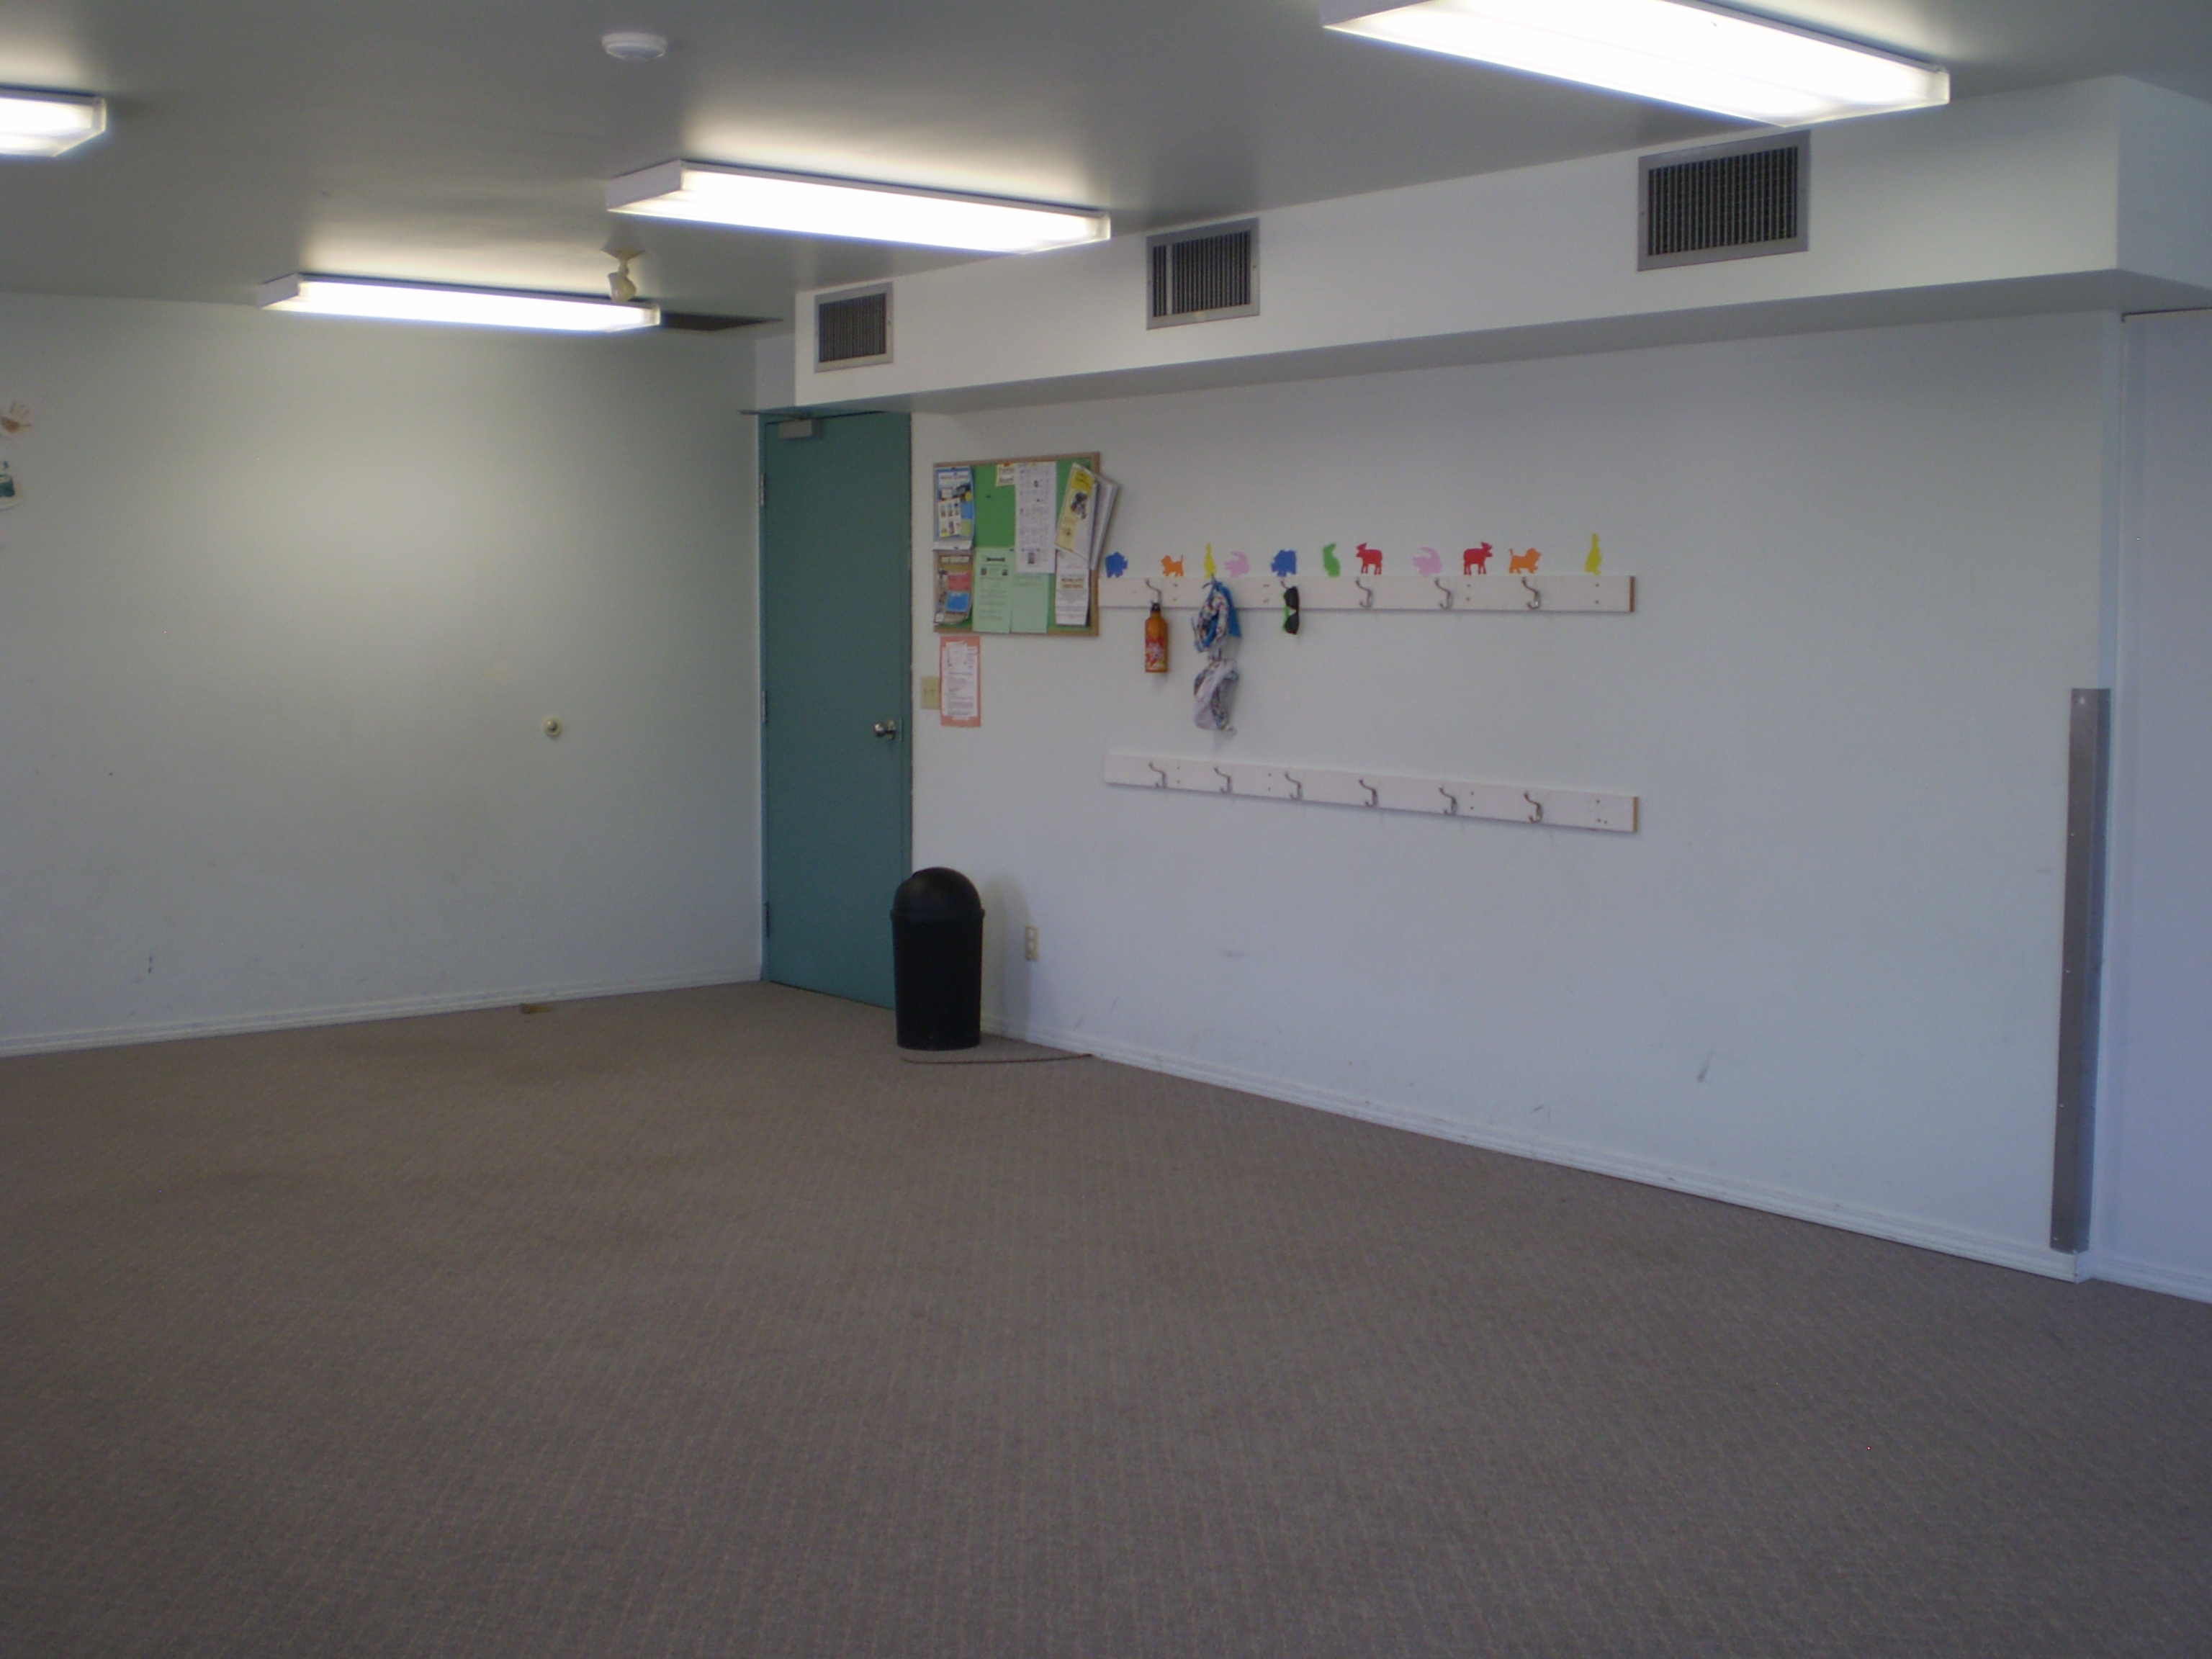 Games room - suitable for groups needing space for activities